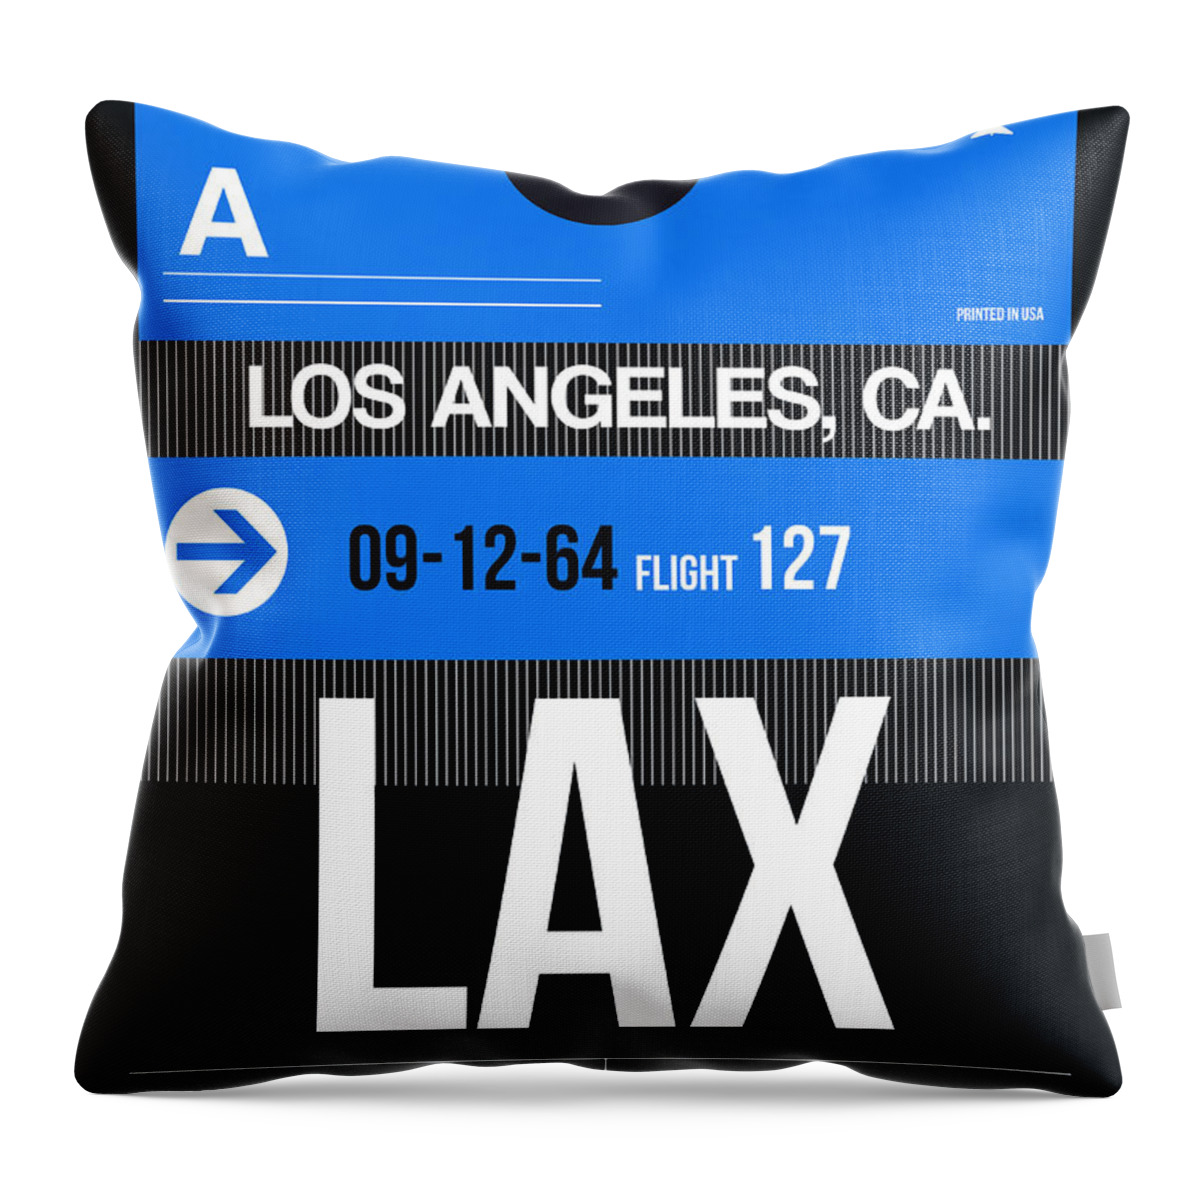  Throw Pillow featuring the digital art Los Angeles Luggage Poster 3 by Naxart Studio